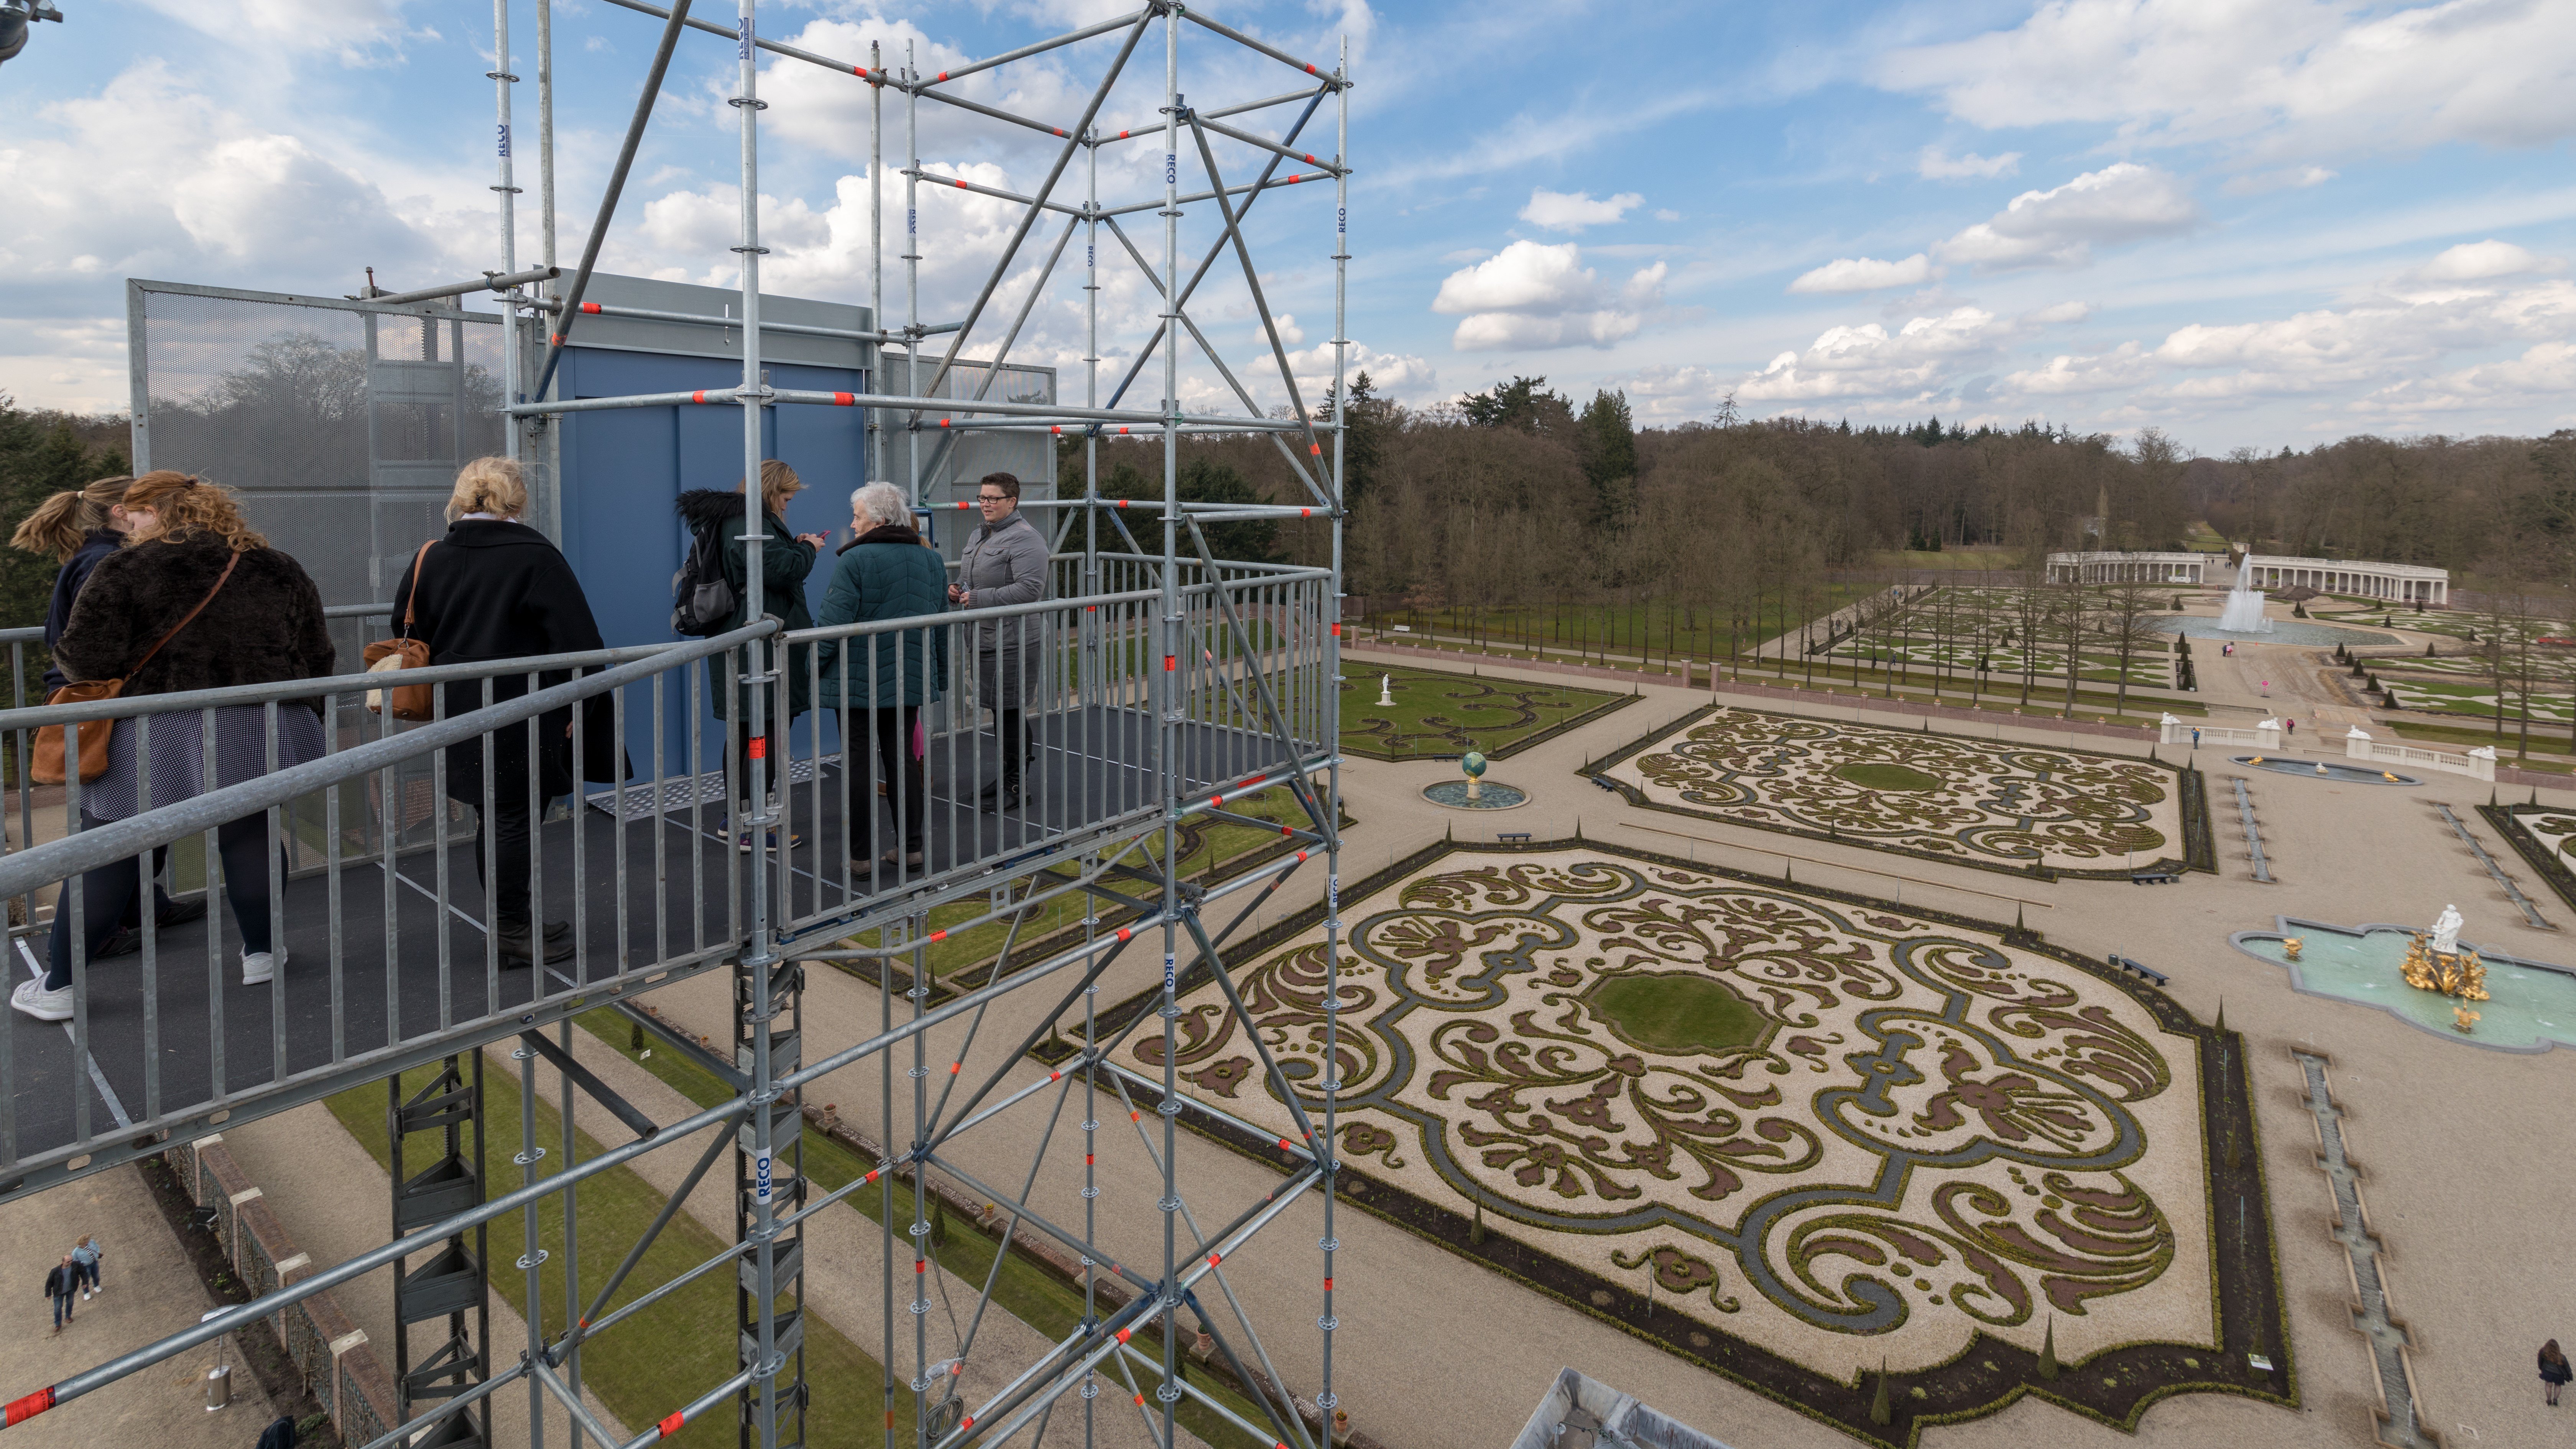 RECO provided passenger lifts for the Dutch Het Loo Palace for visitors to access the rooftop viewpoint